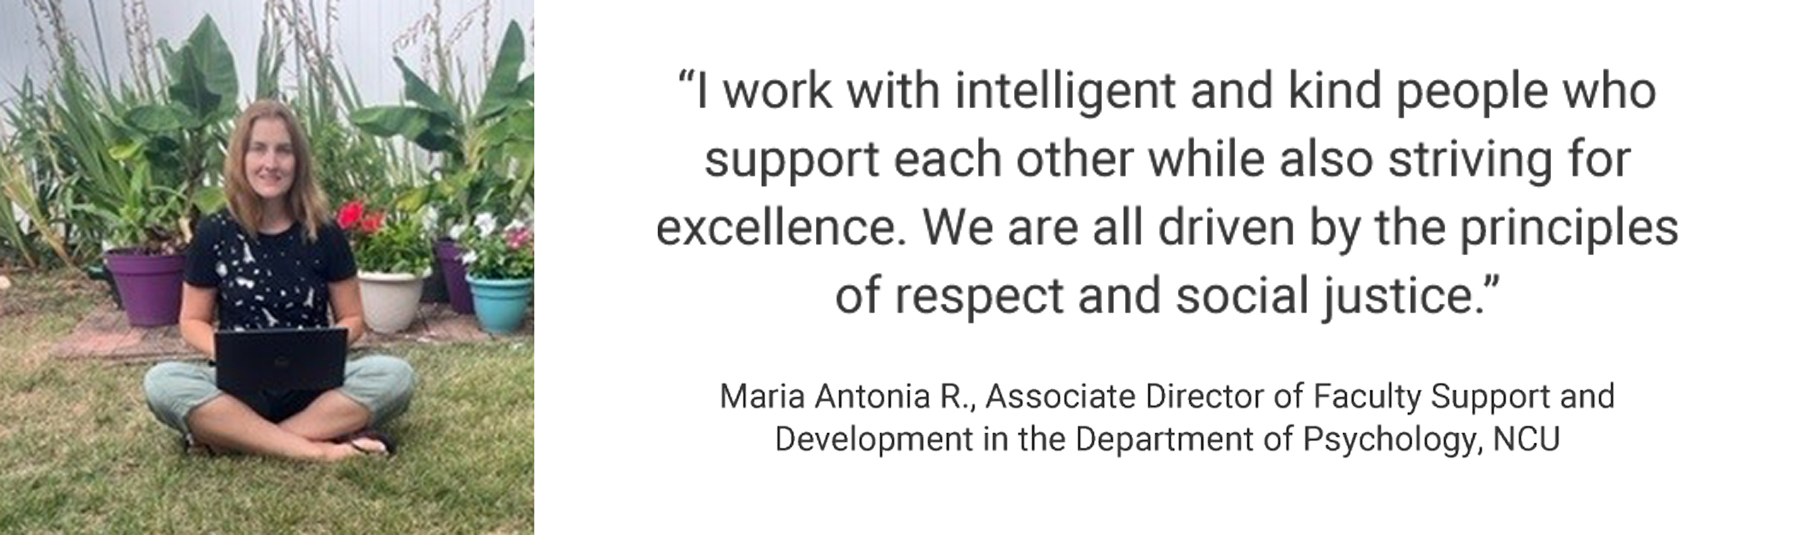 Employee Testimonial, "I work with intelligent and kind people who support each other while also striving for excellence. We are all driven by the principles of respect and social justice." Maria Antonia R., Associate Director of Faculty Support and Development in the Department of Psychology, NCU